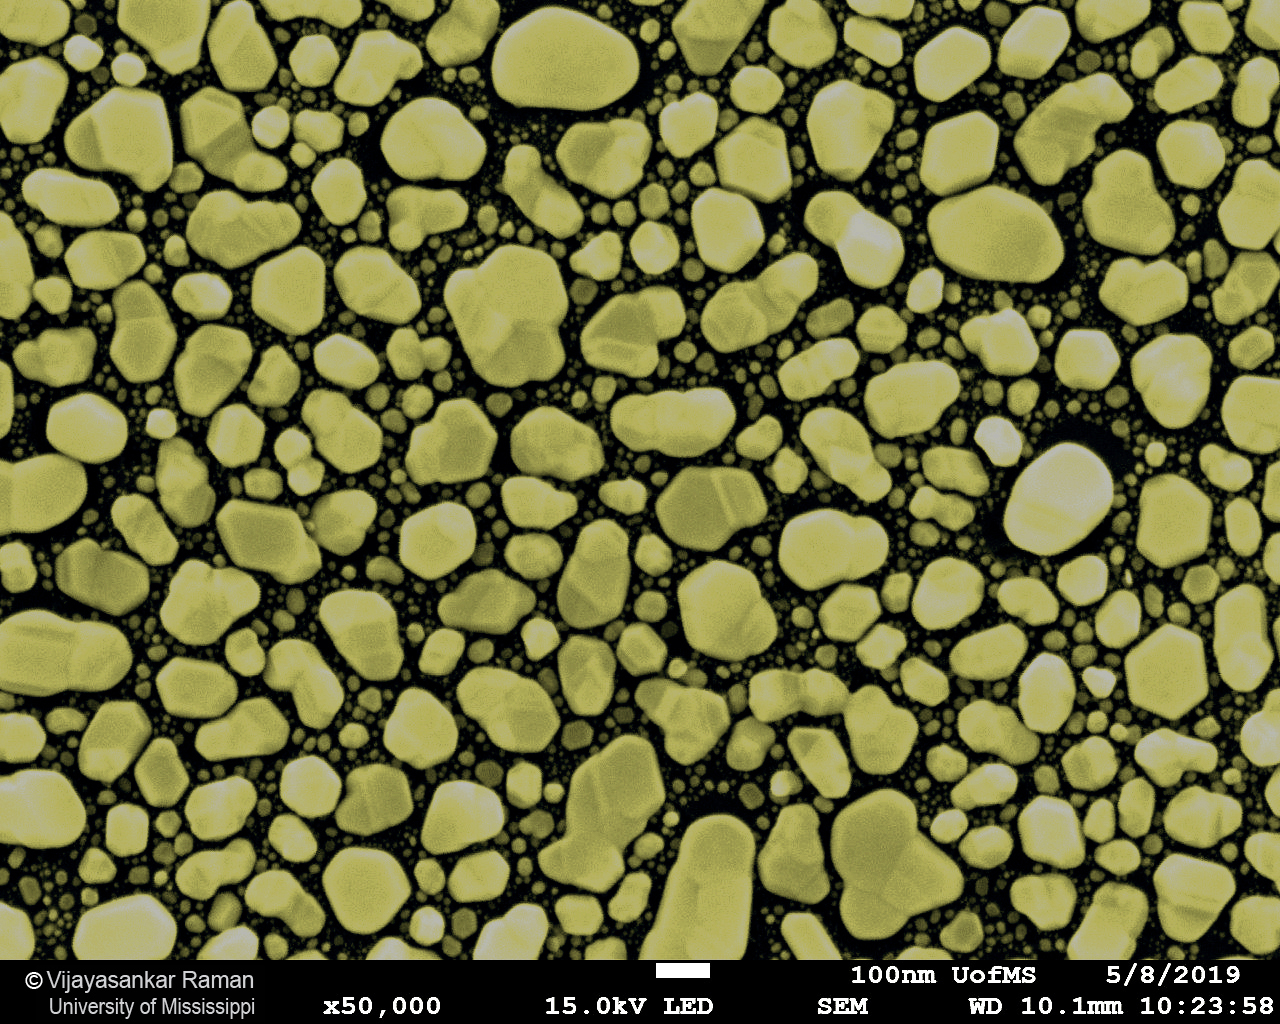 Colorized SEM image of gold nanoparticles on carbon in a JEOL reference sample